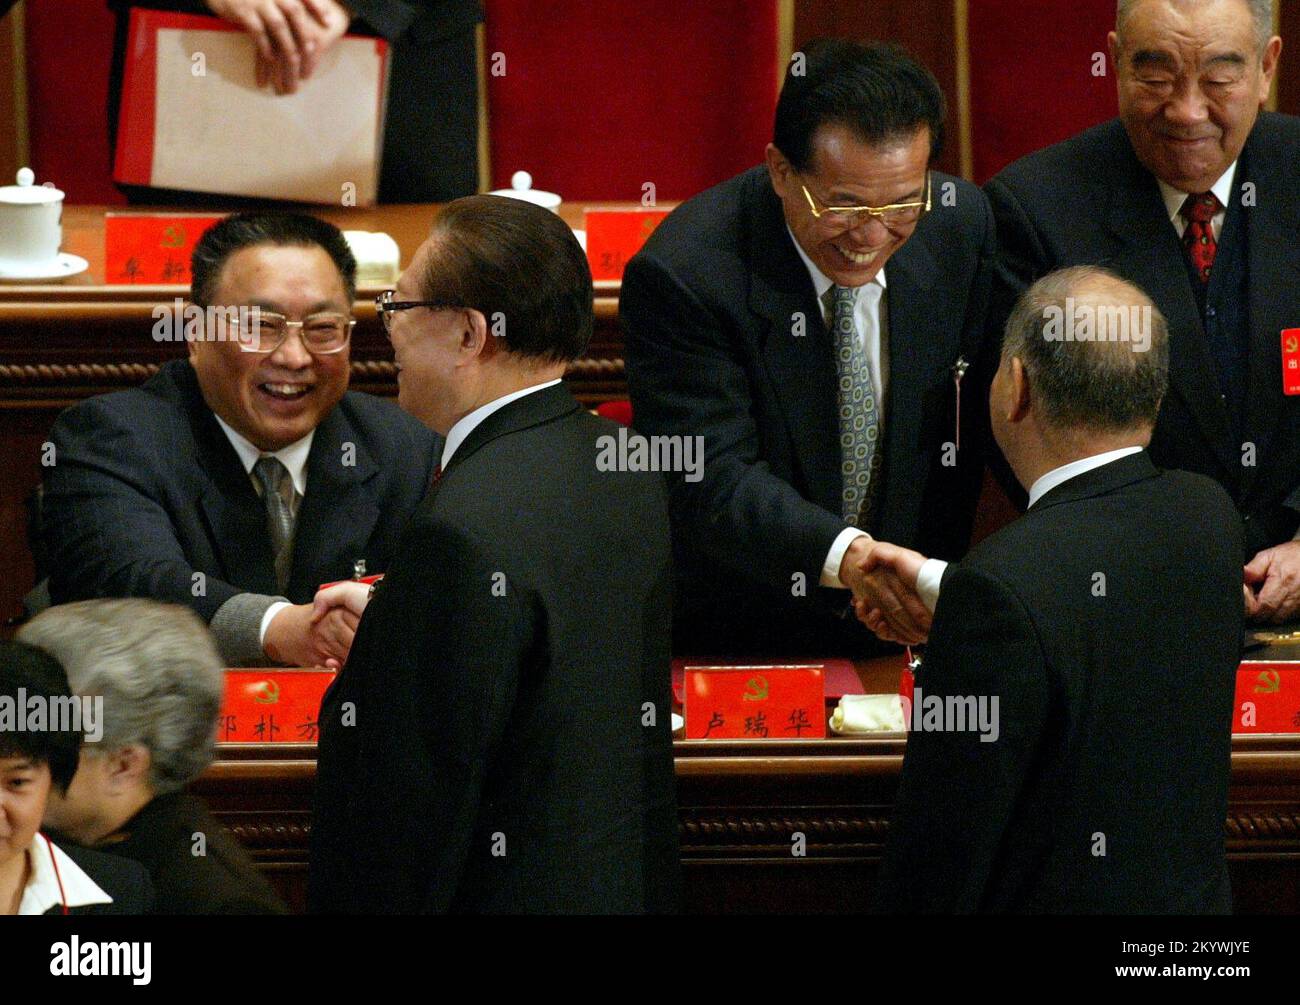 The Chinese President Jiang Zemin (2nd left) shakes hands with Deng Pufang (L), who is the son of late Deng Xiaoping, on the closing day of the China's 16th Communist Party Congress at the Great Hall of the People in Beijing, China. Mr Hu Jintao is expected to be elected the next Chinese President during this congress. 14 November 2002  ***NOT FOR ADVERTISING USE*** Stock Photo